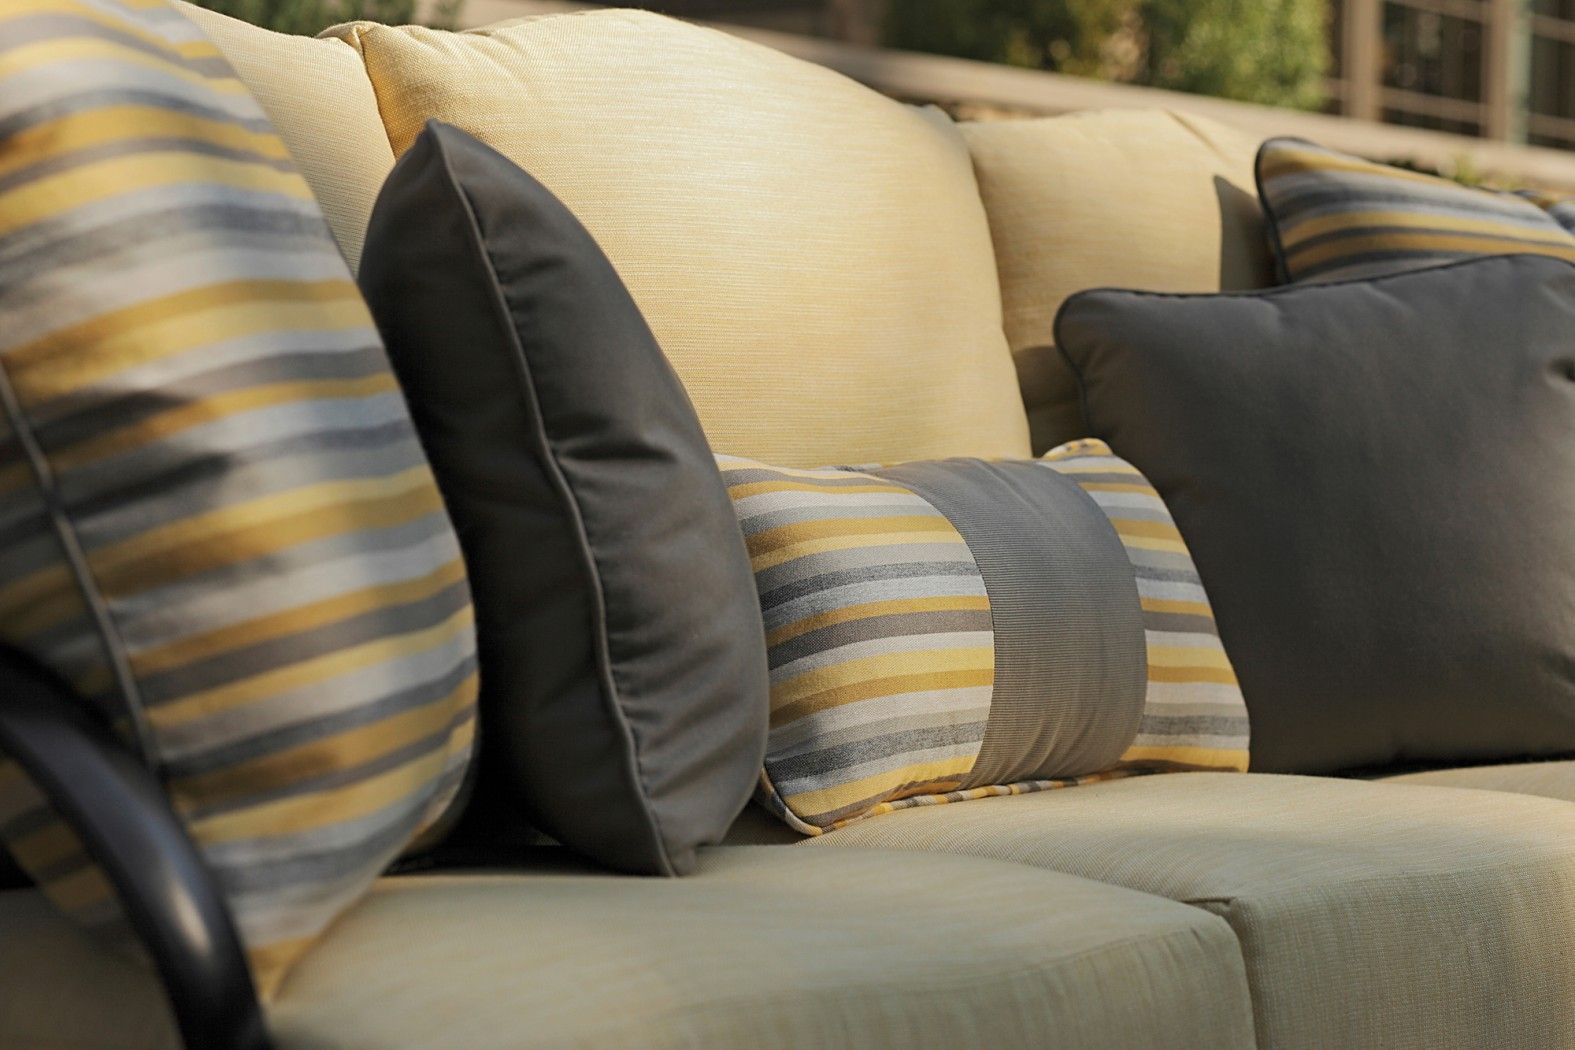 How To Prevent Mold On Outdoor Cushions